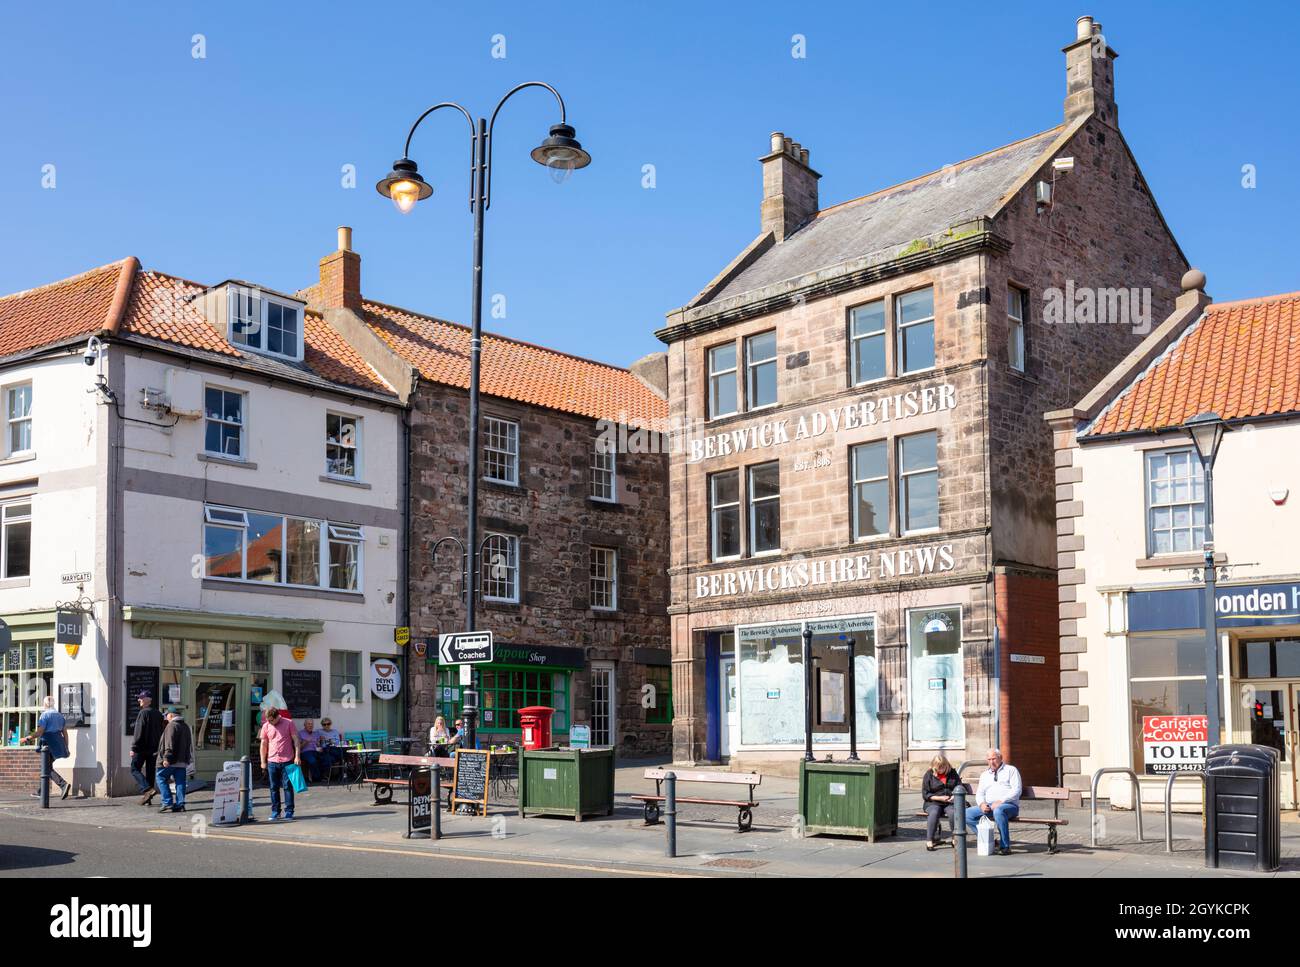 Shops and businesses and the old Berwick Advertiser building on Marygate in Berwick-upon-Tweed or Berwick-on-Tweed Northumberland England GB UK Europe Stock Photo